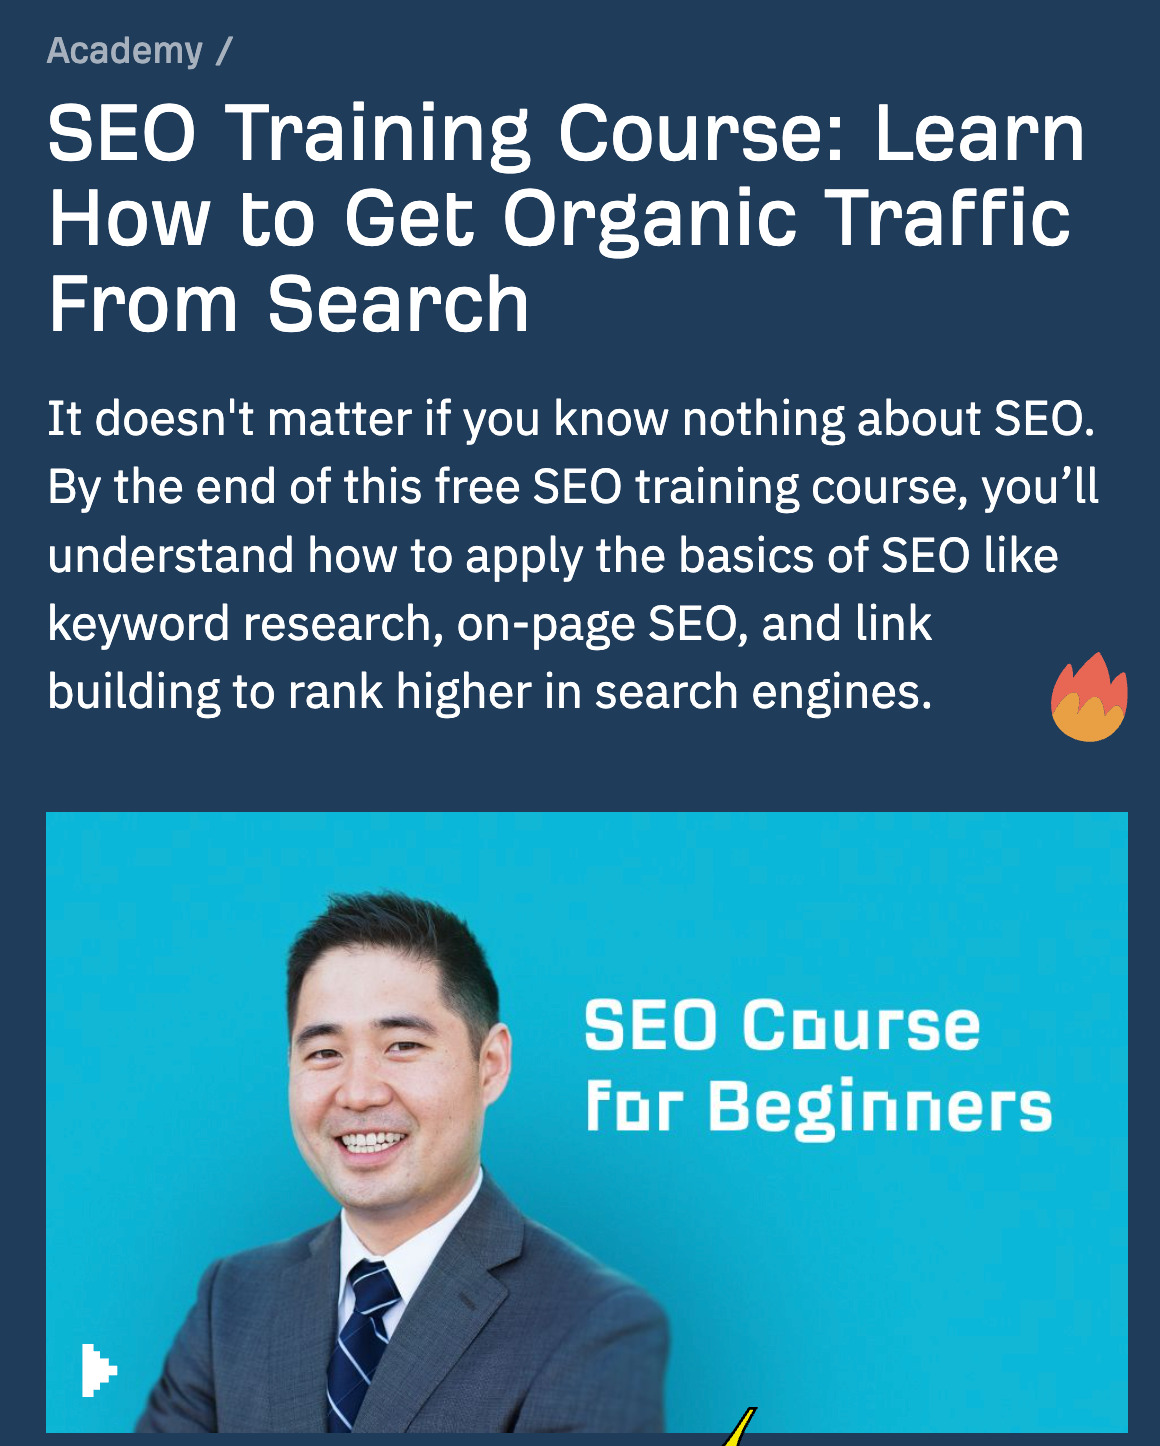 Ahrefs' SEO course for beginners
